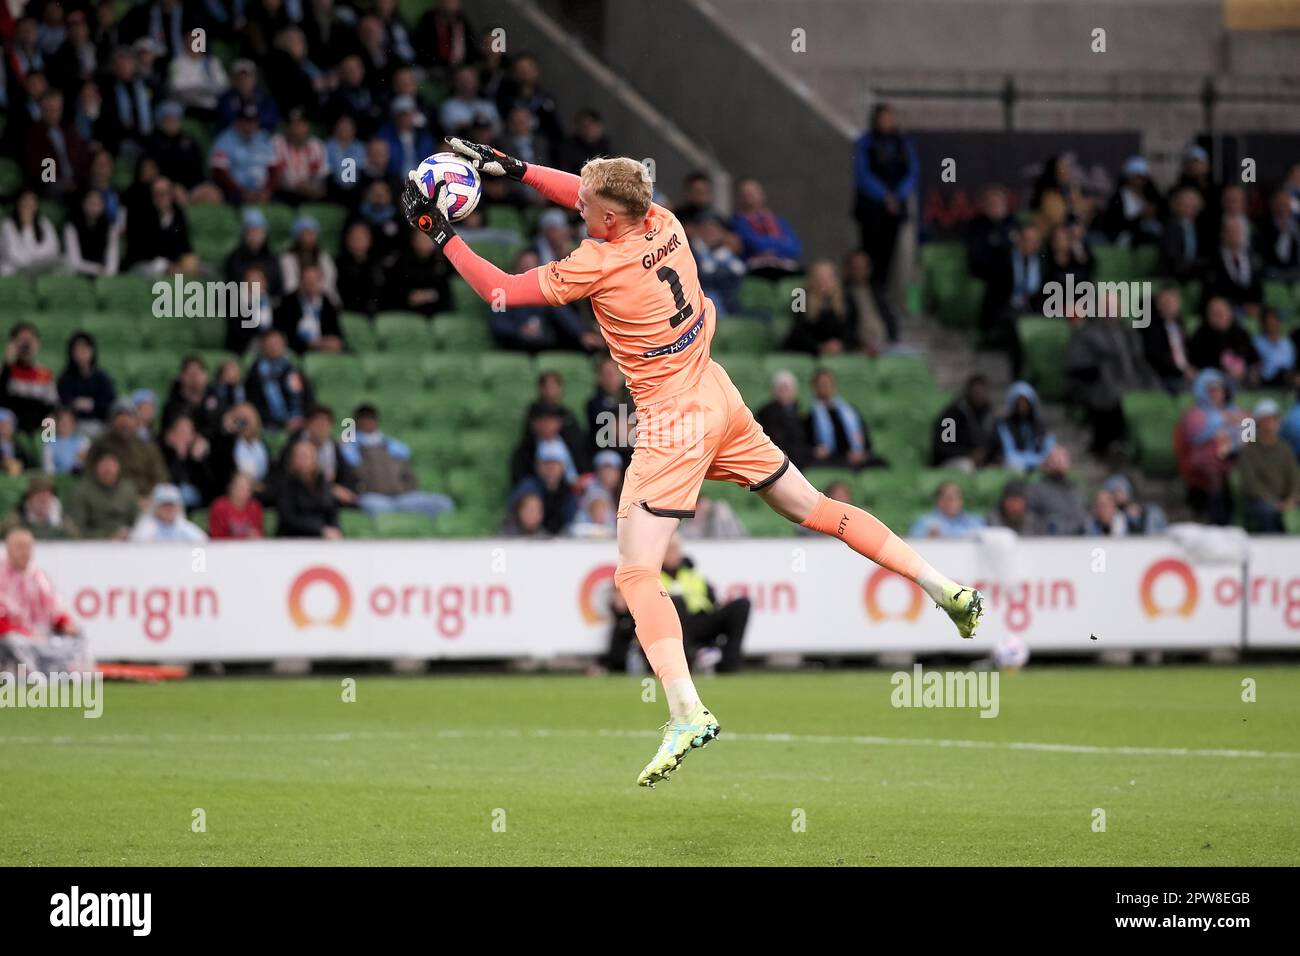 Melbourne, Australia, 28 April, 2023. Tom Glover of Melbourne City FC catches the ball during the A-League Men's football match between Melbourne City and Western Sydney Wanderers at AAMI Park on April 28, 2023 in Melbourne, Australia. Credit: Dave Hewison/Alamy Live News Stock Photo